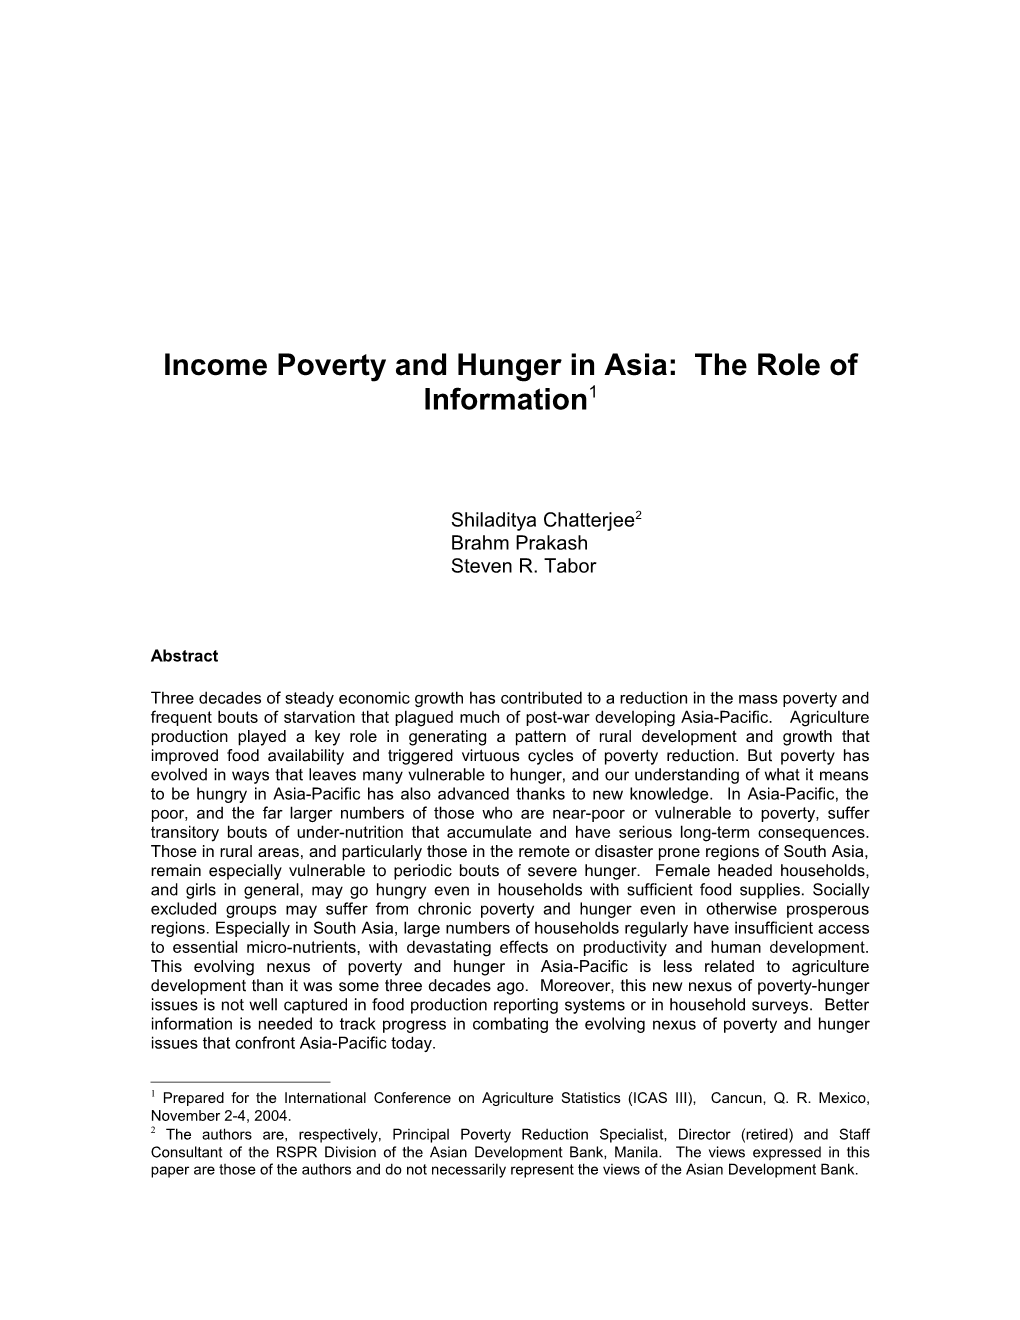 Poverty and Hunger in Asia: Do Averages Deceive